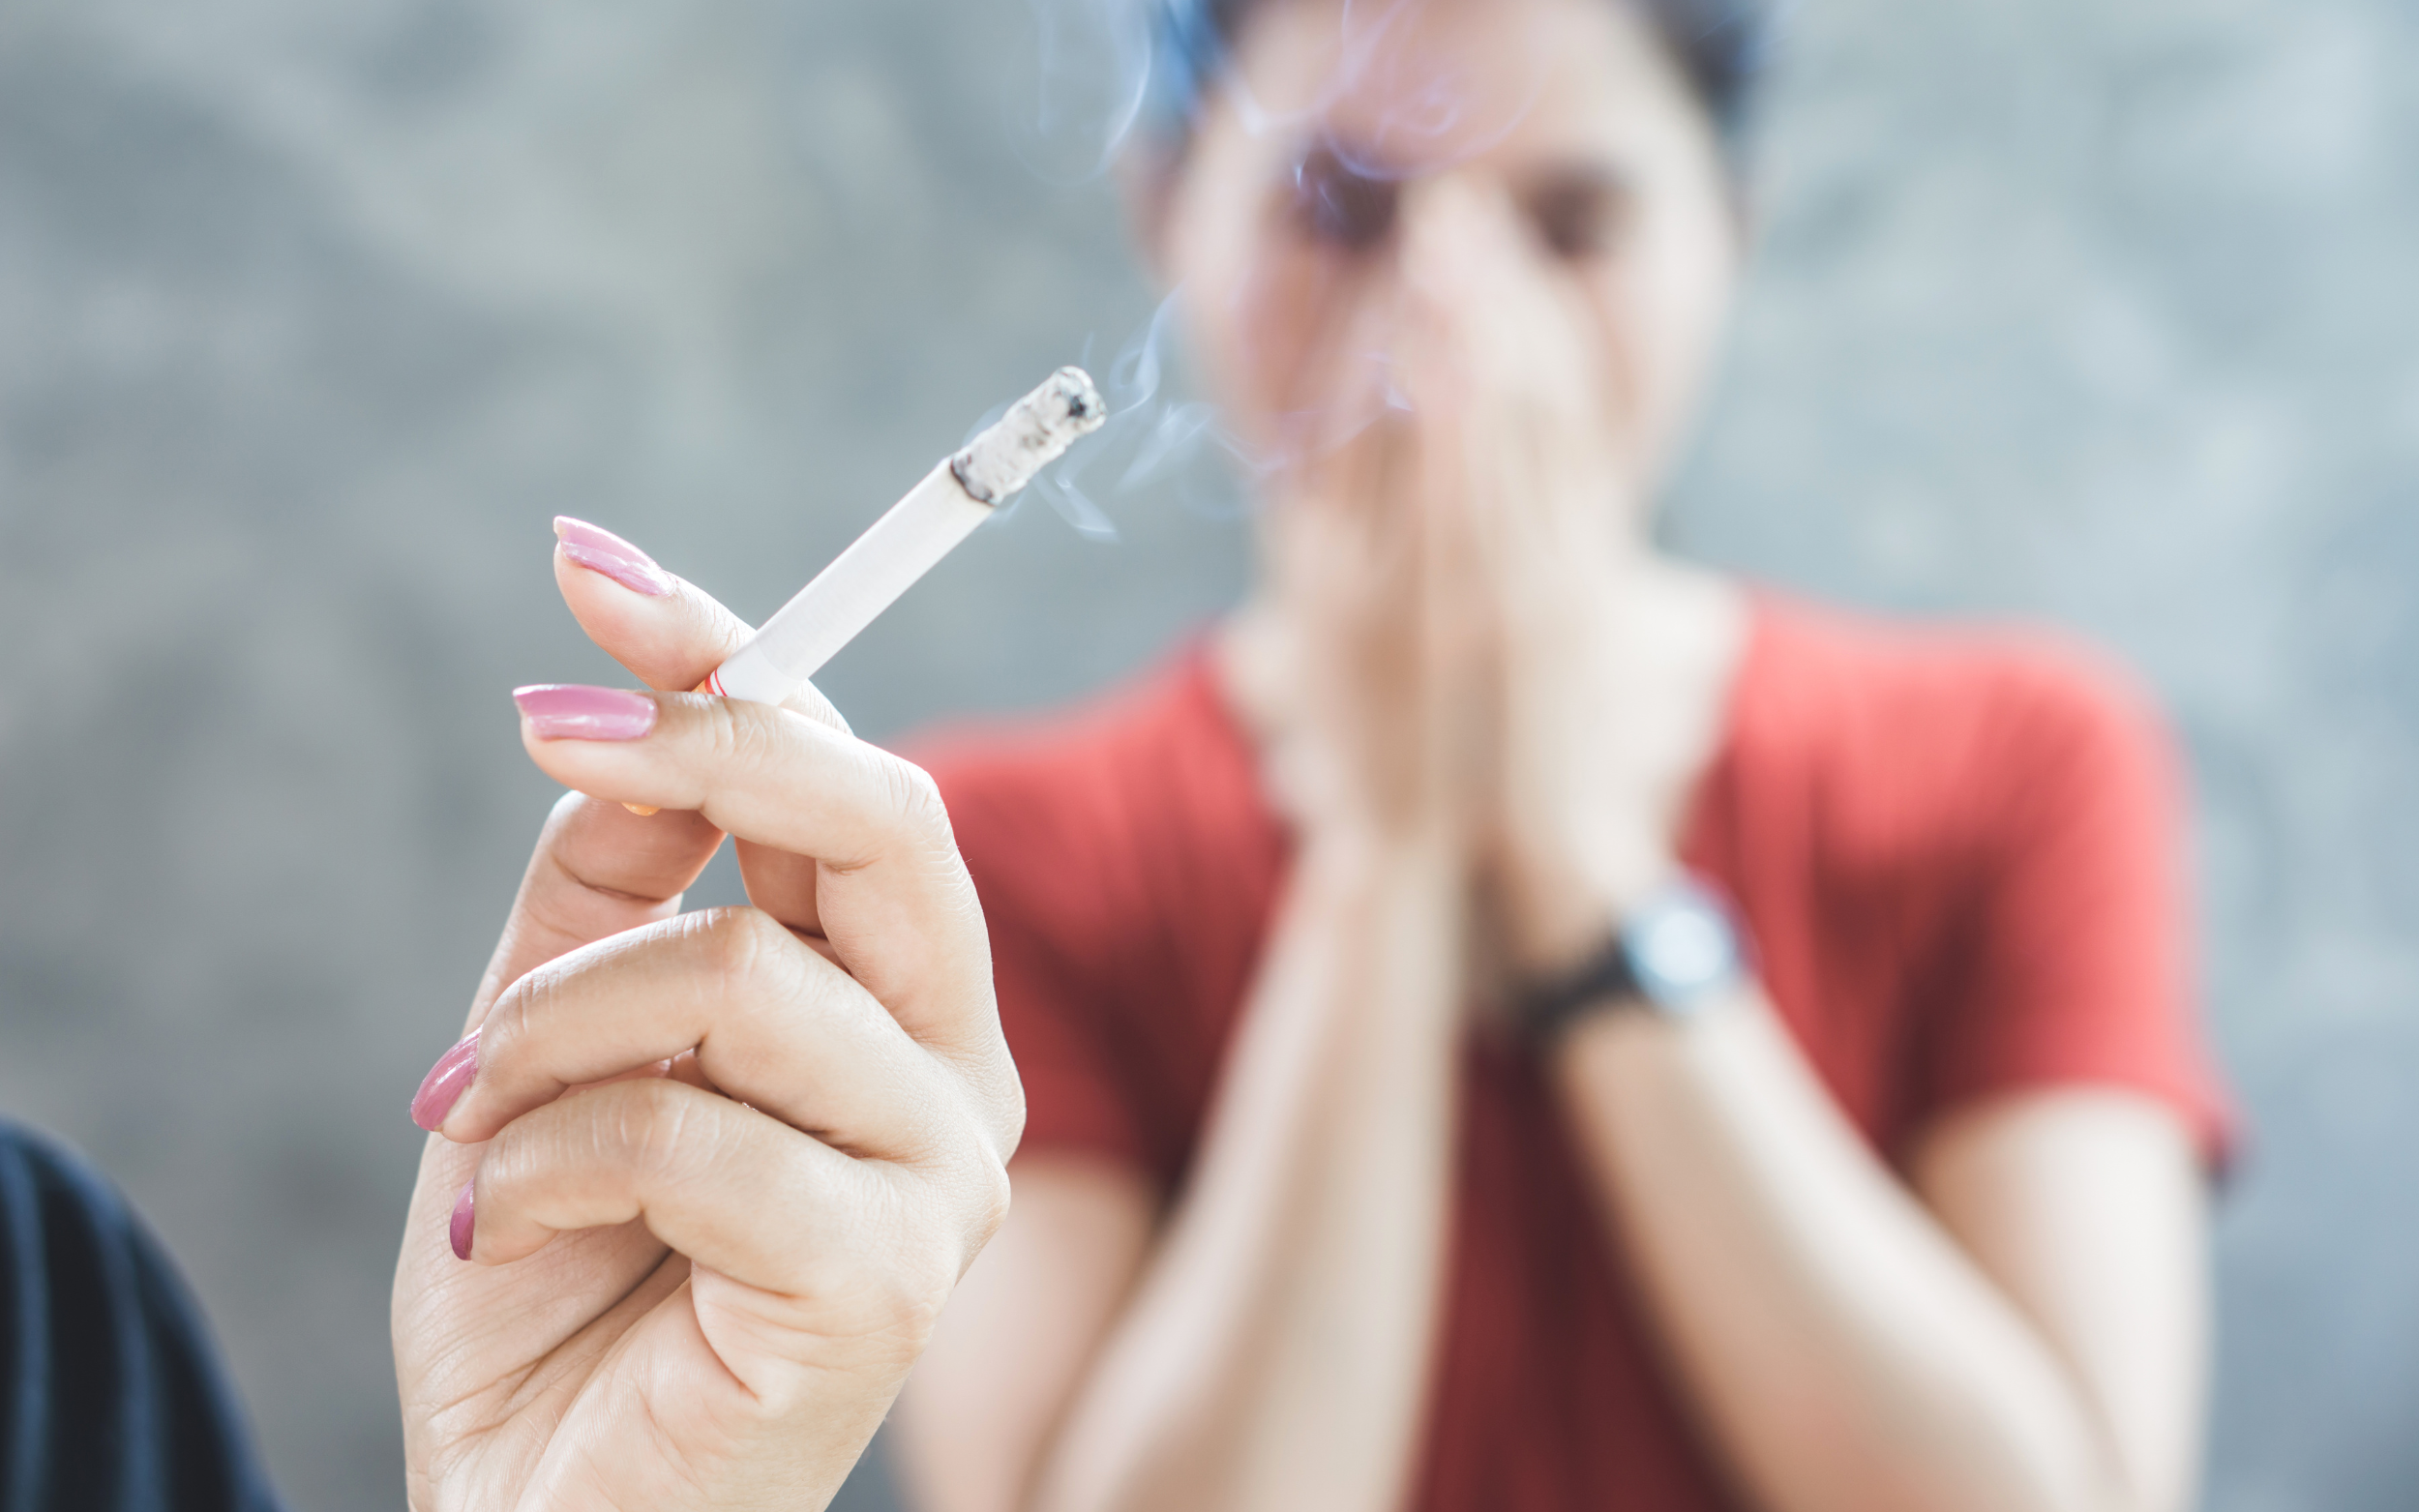 A woman holding a lit cigarette with someone in the background holding their hands over their face